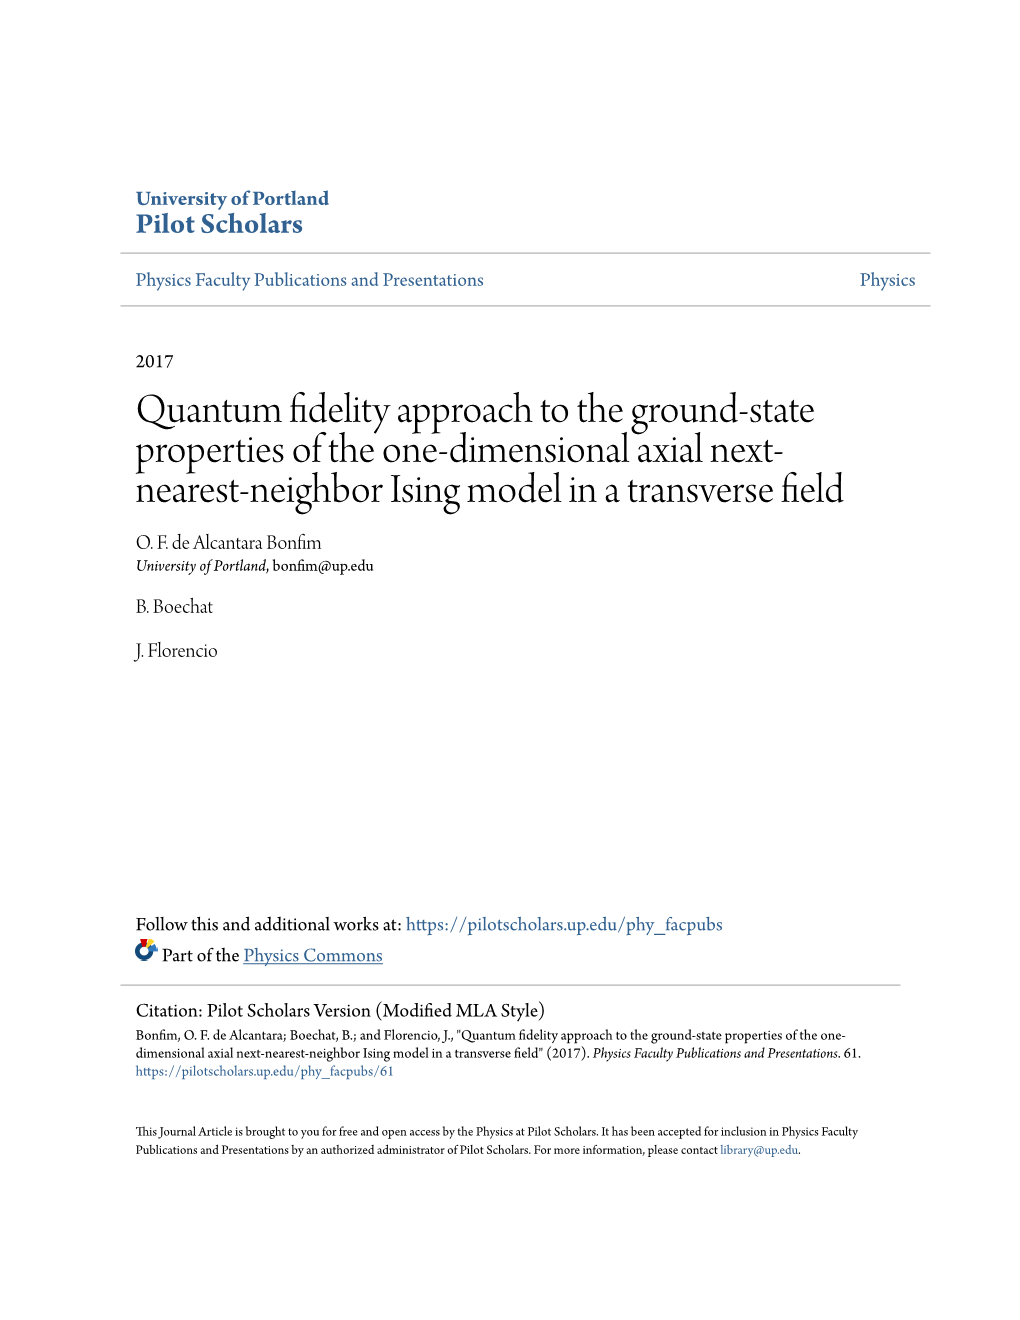 Quantum Fidelity Approach to the Ground-State Properties of the One-Dimensional Axial Next- Nearest-Neighbor Ising Model in a Transverse Field O